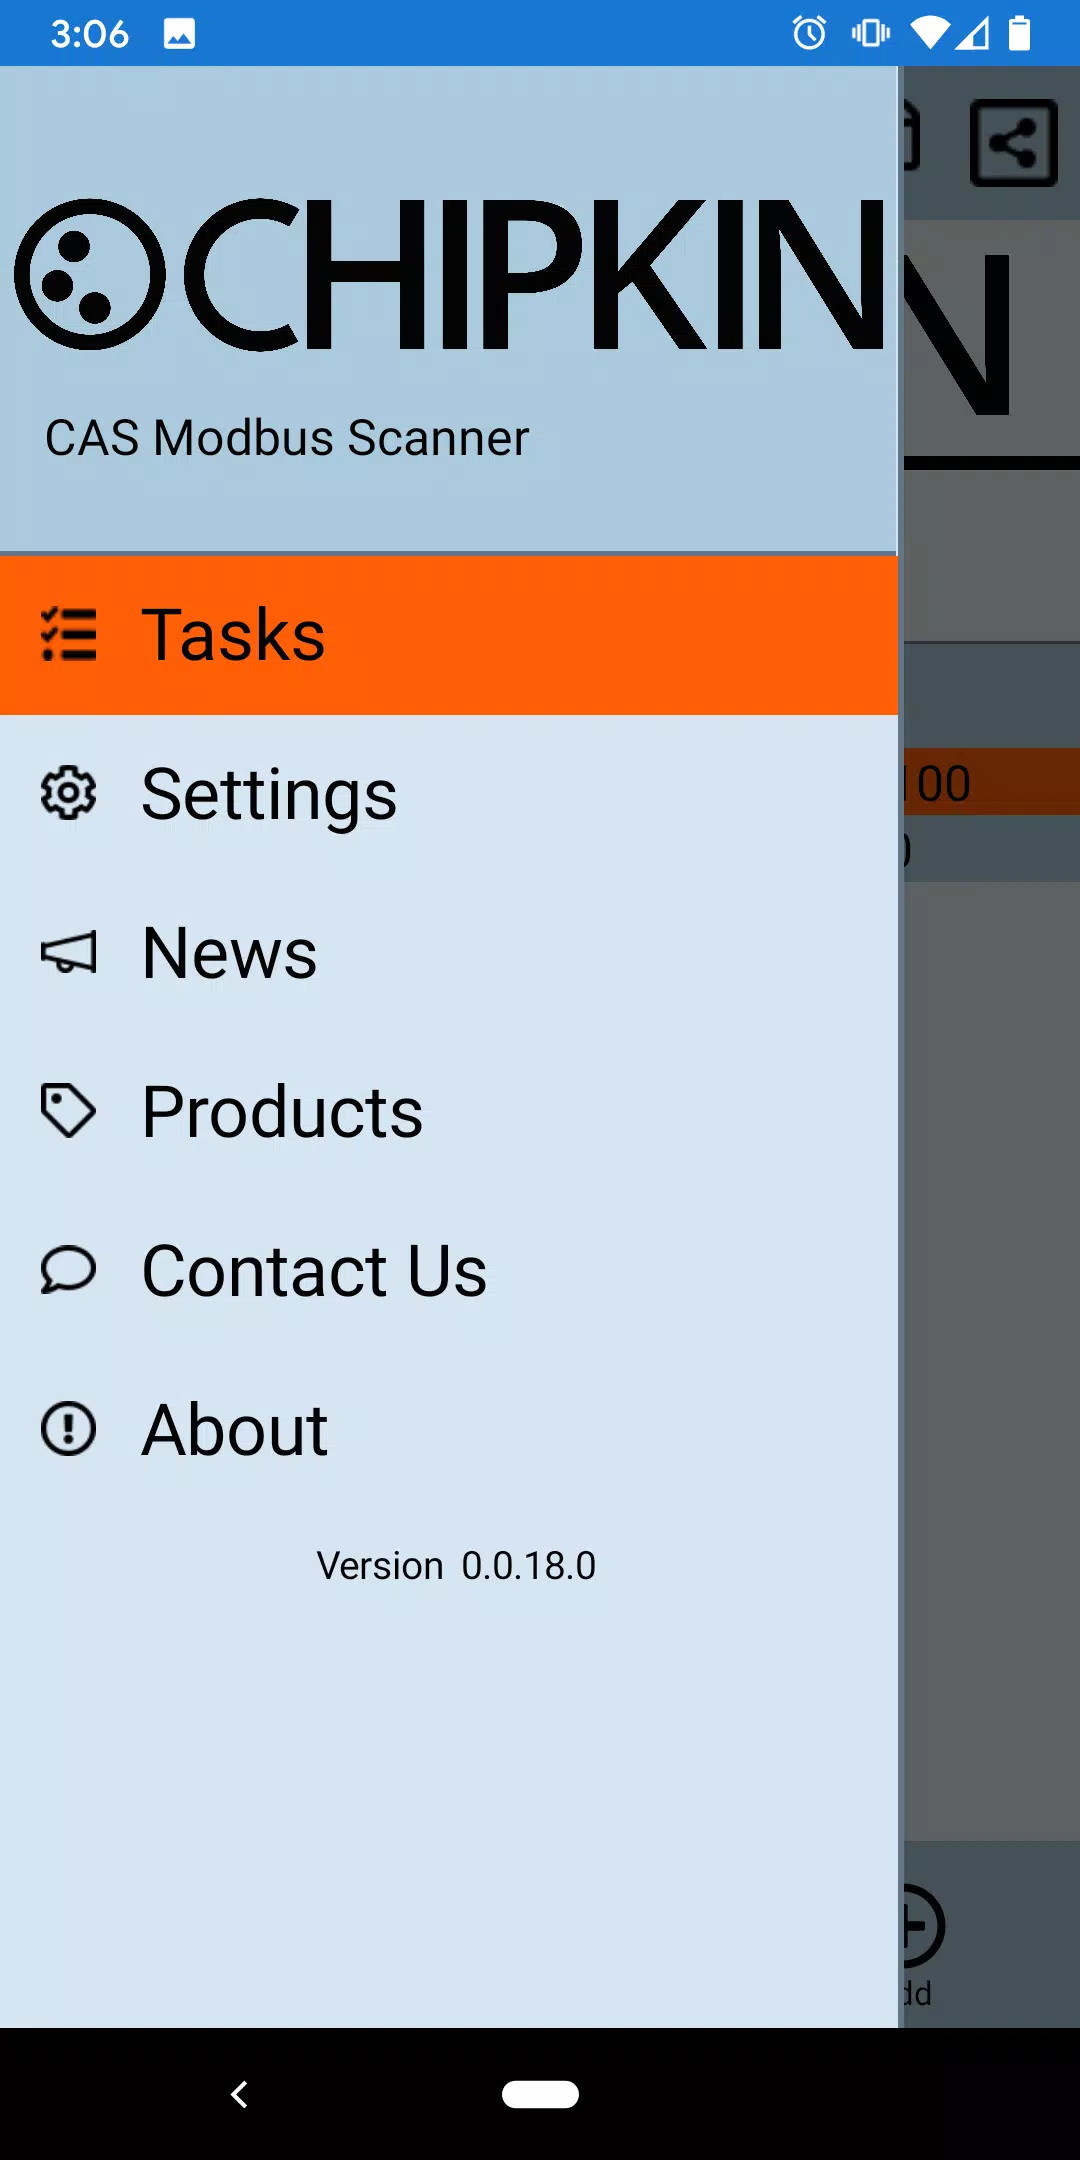 CAS Modbus Scanner for Android - APK Download